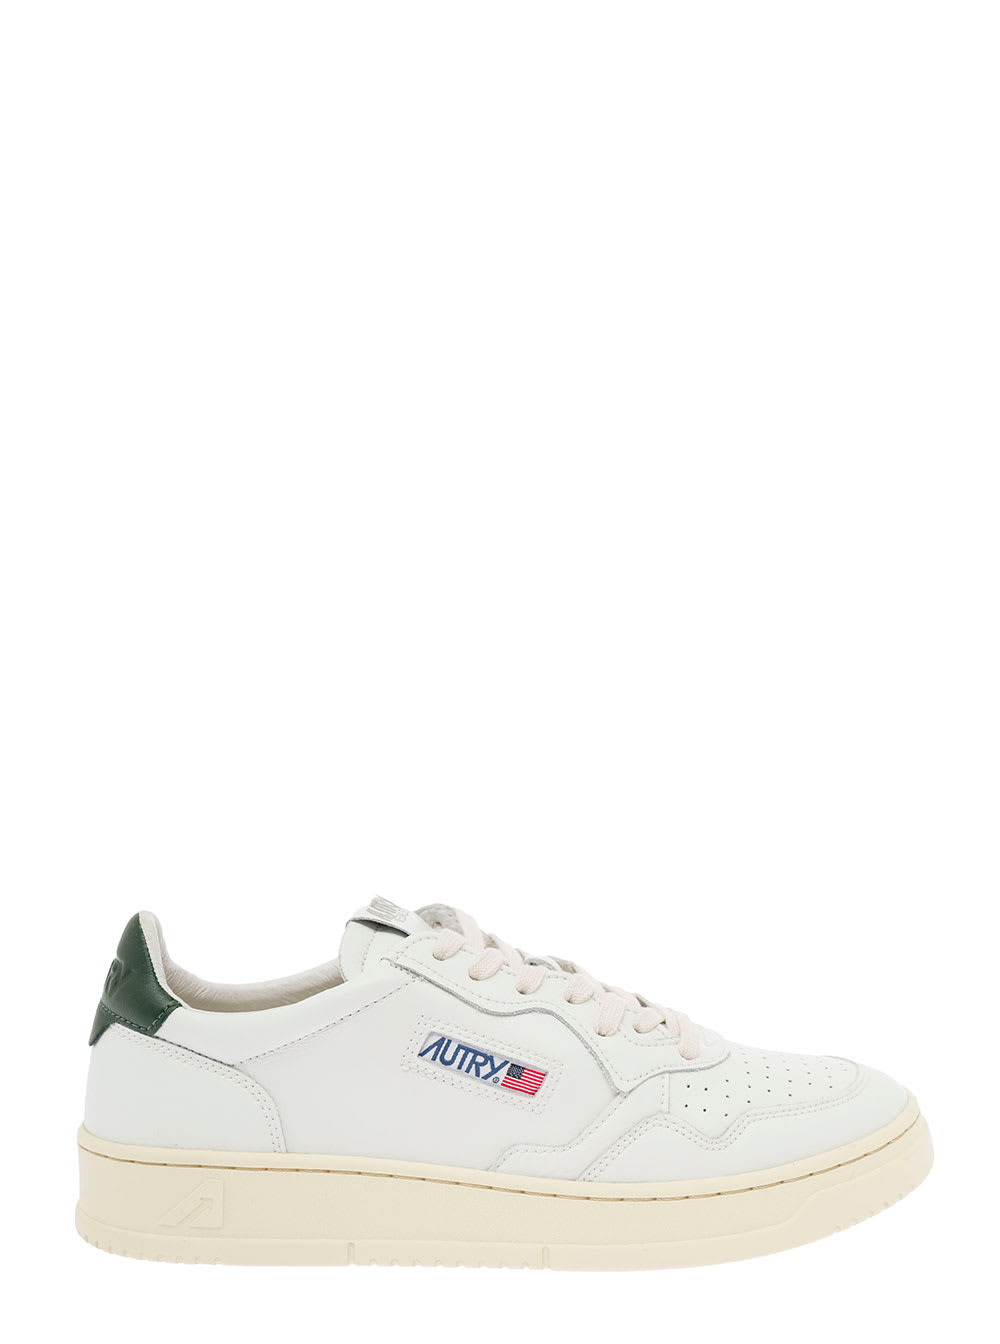 Autry Mans White And Green Leather Low Sneakers